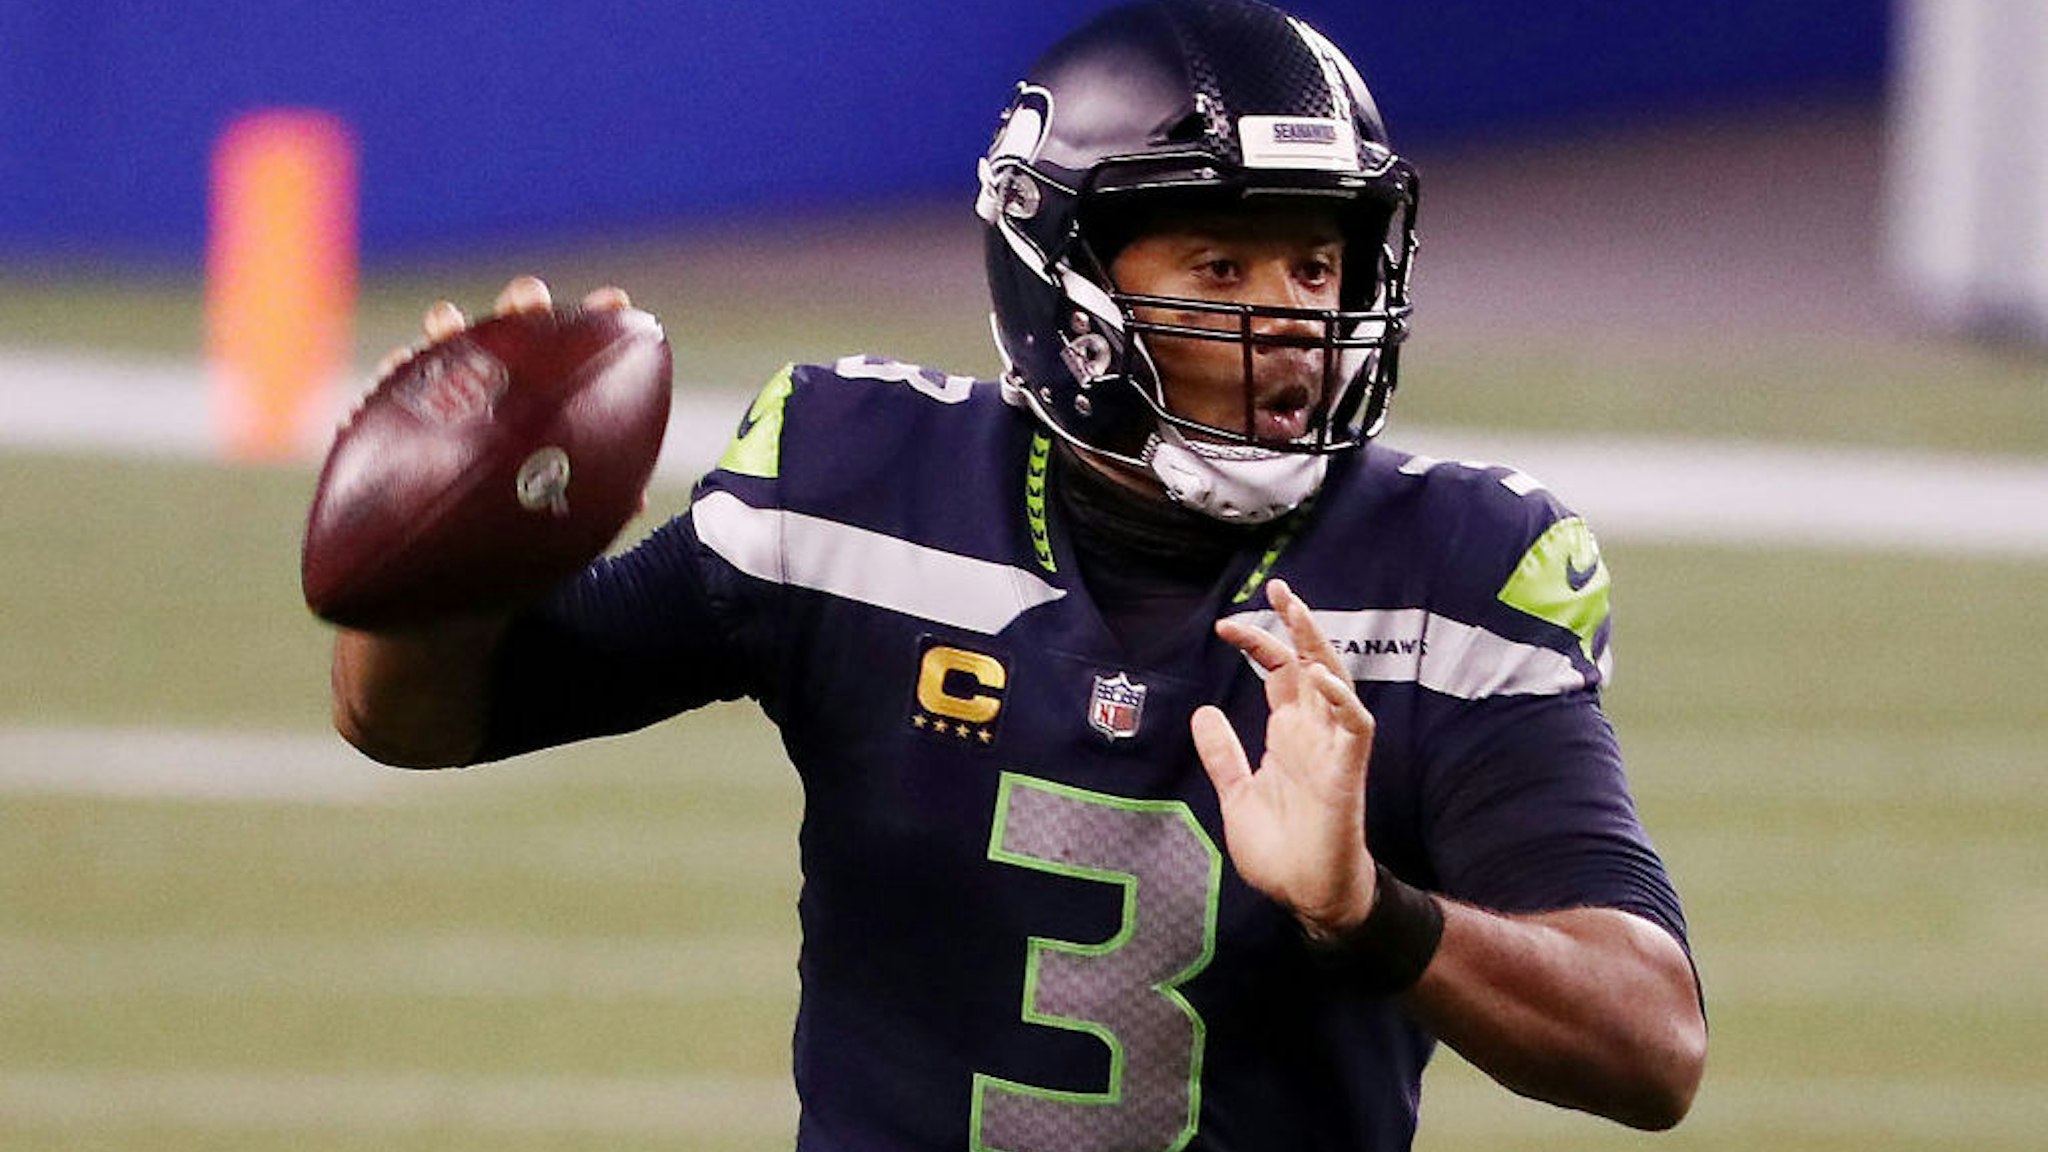 SEATTLE, WASHINGTON - SEPTEMBER 20: Russell Wilson #3 of the Seattle Seahawks looks to pass during the second half against the New England Patriots at CenturyLink Field on September 20, 2020 in Seattle, Washington. (Photo by Abbie Parr/Getty Images)